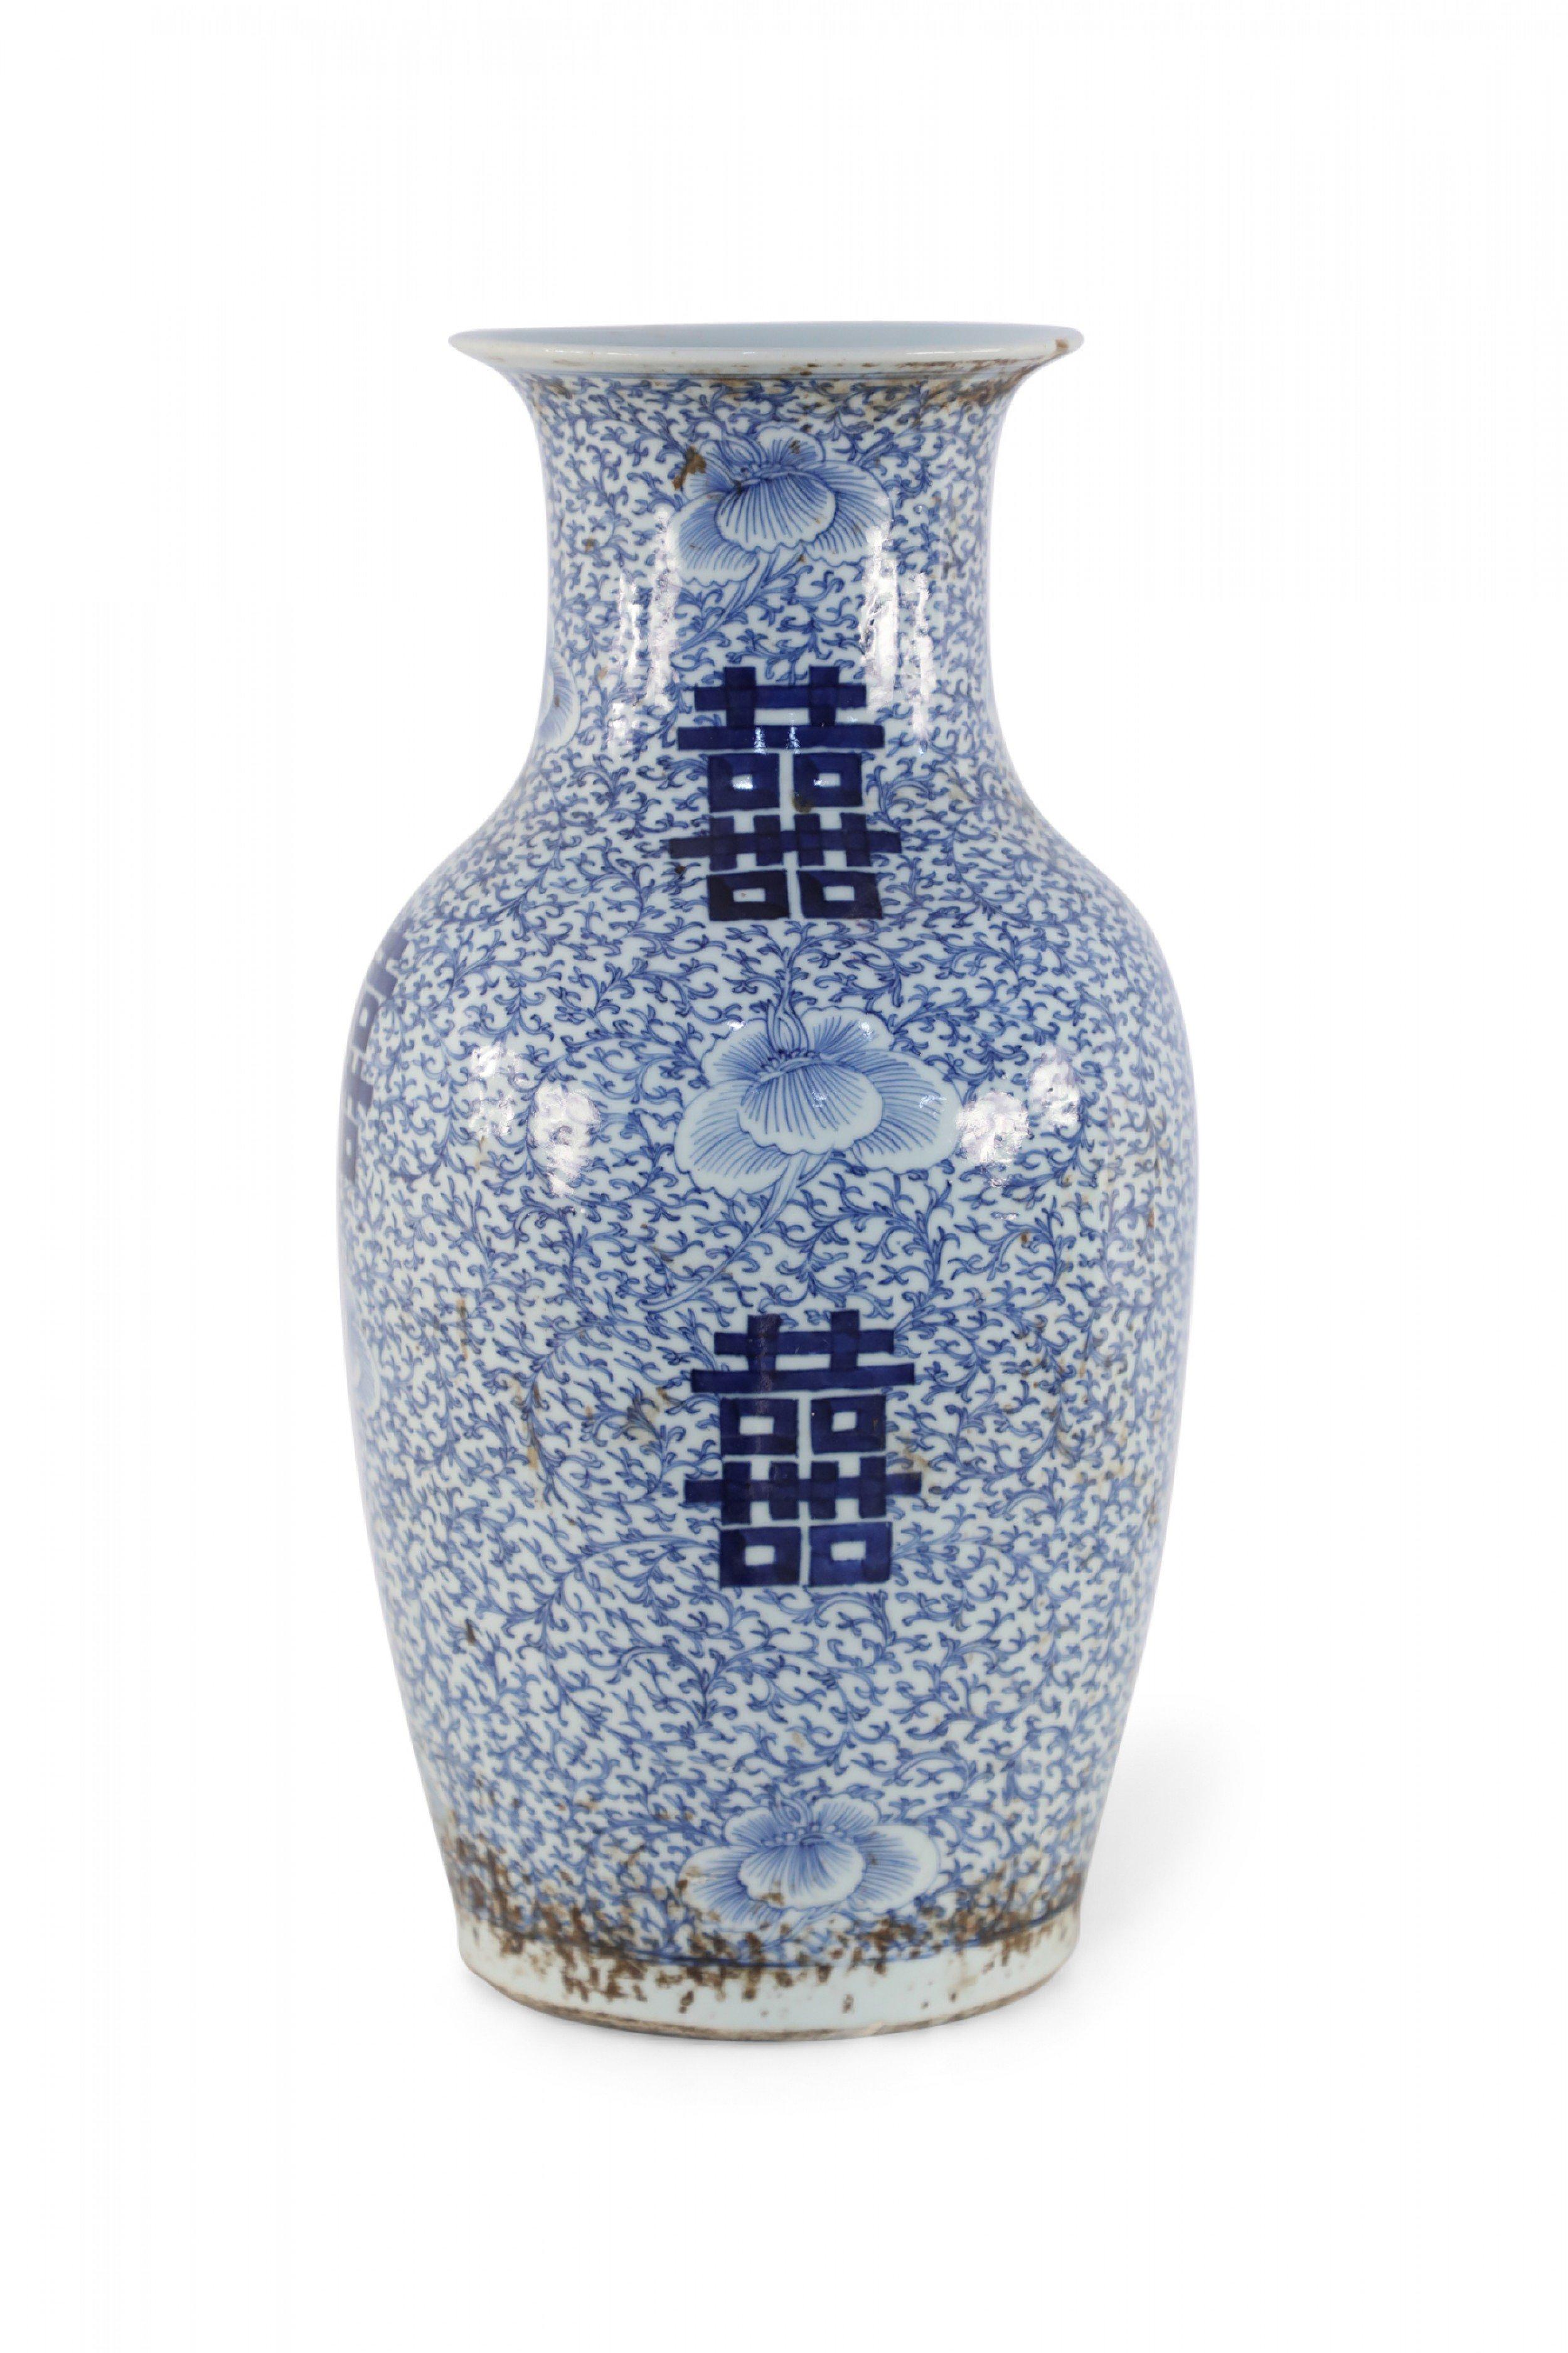 20th Century Chinese White and Blue Vine Design Porcelain Urn For Sale